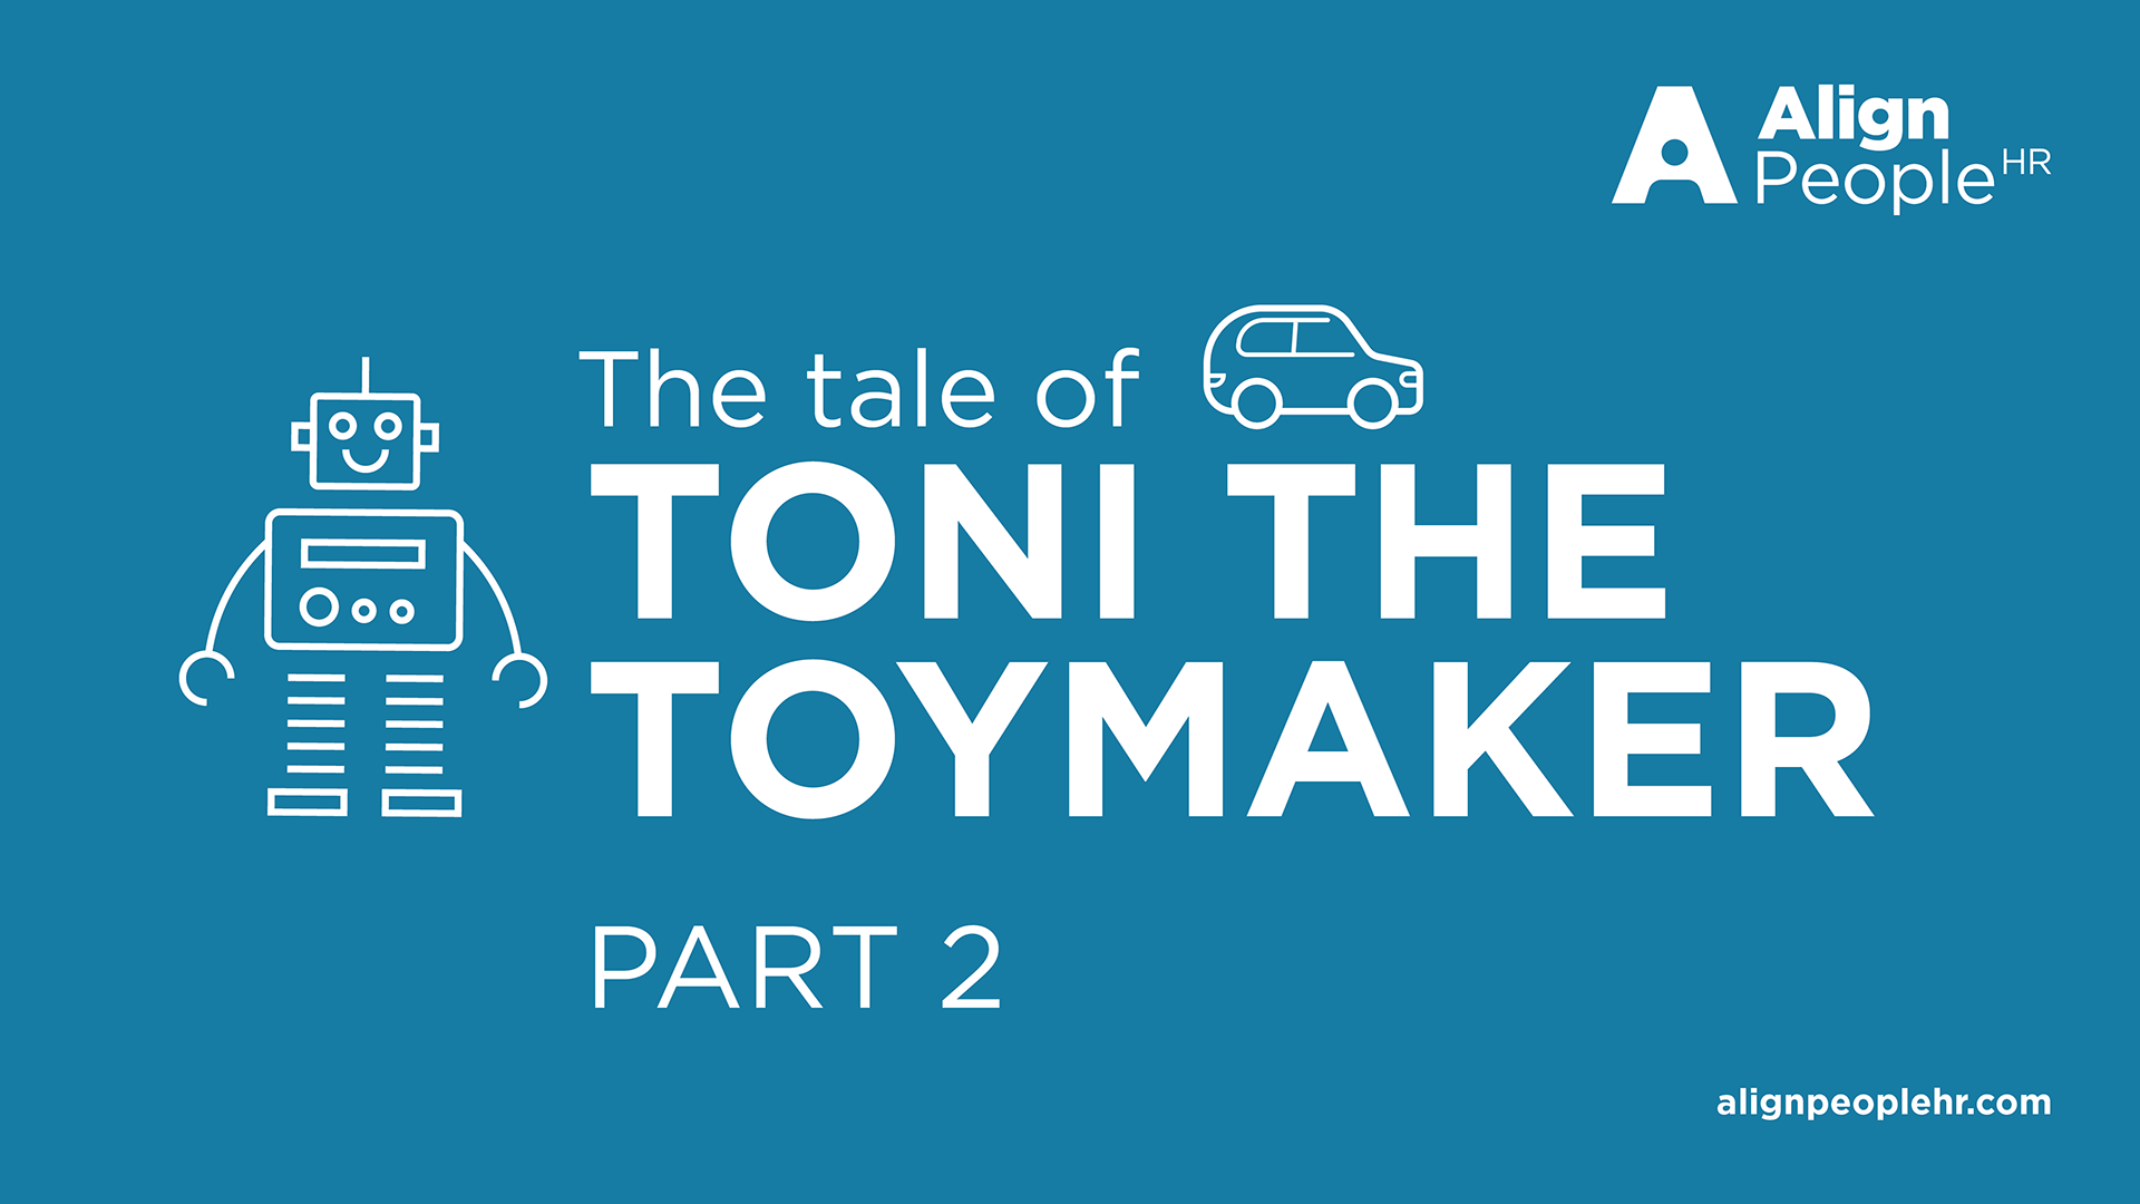 The Tale of Toni the Toy Maker - Part 2